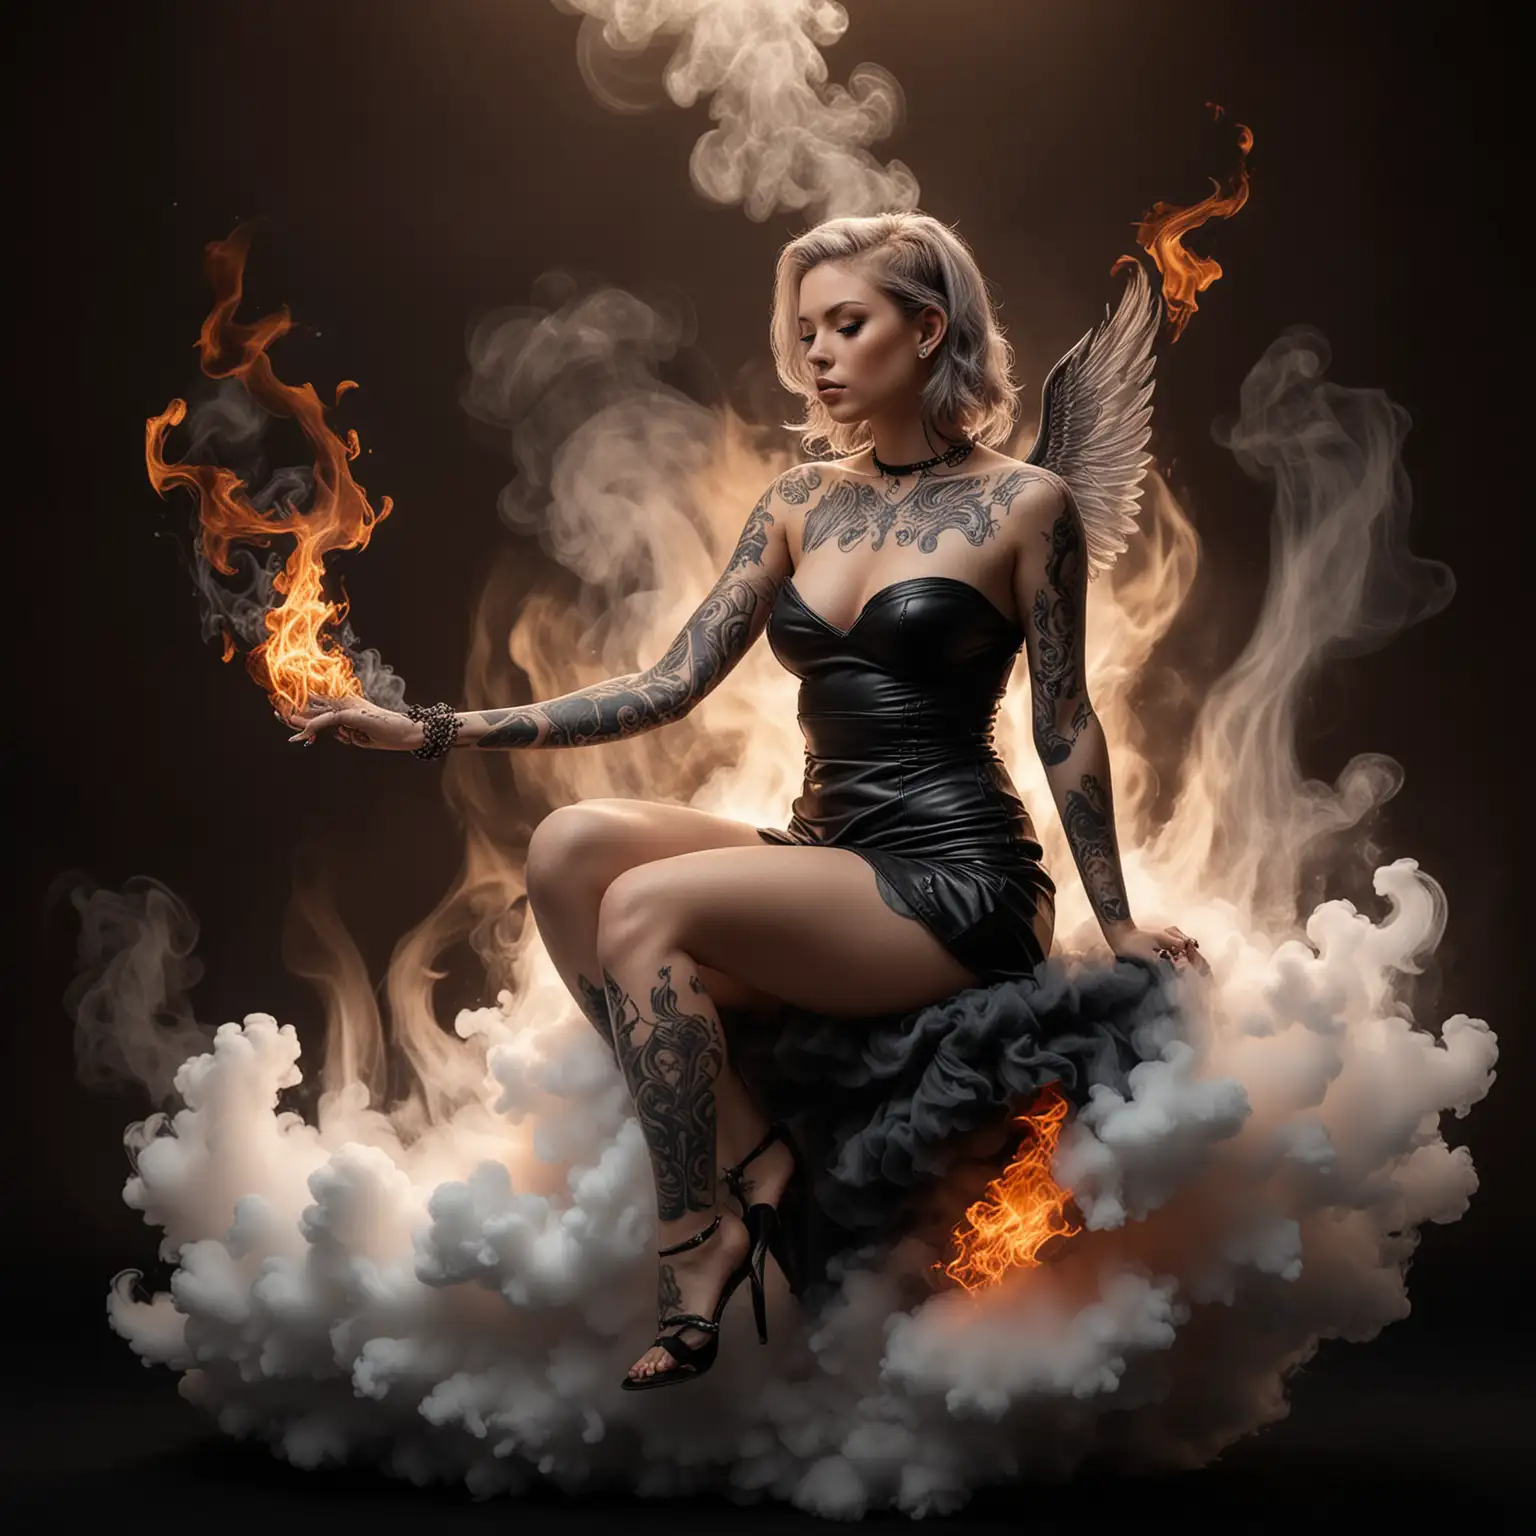 Tattooed Angel Seated on Smoking Cloud with Fiery Atmosphere